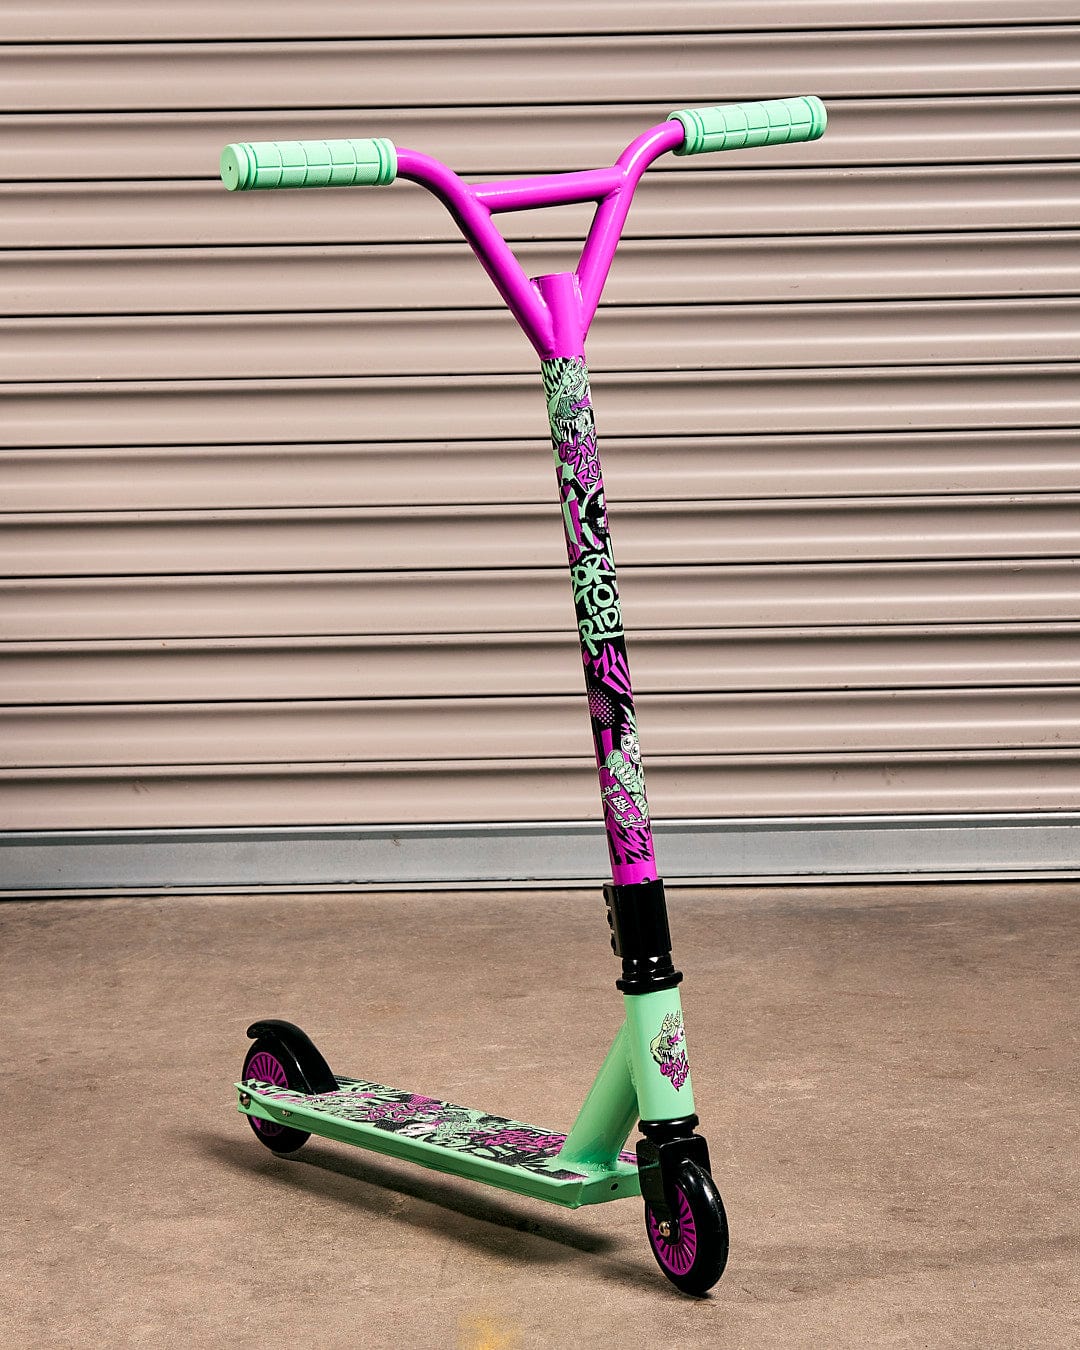 Creeper Stunt Scooter - Turquoise